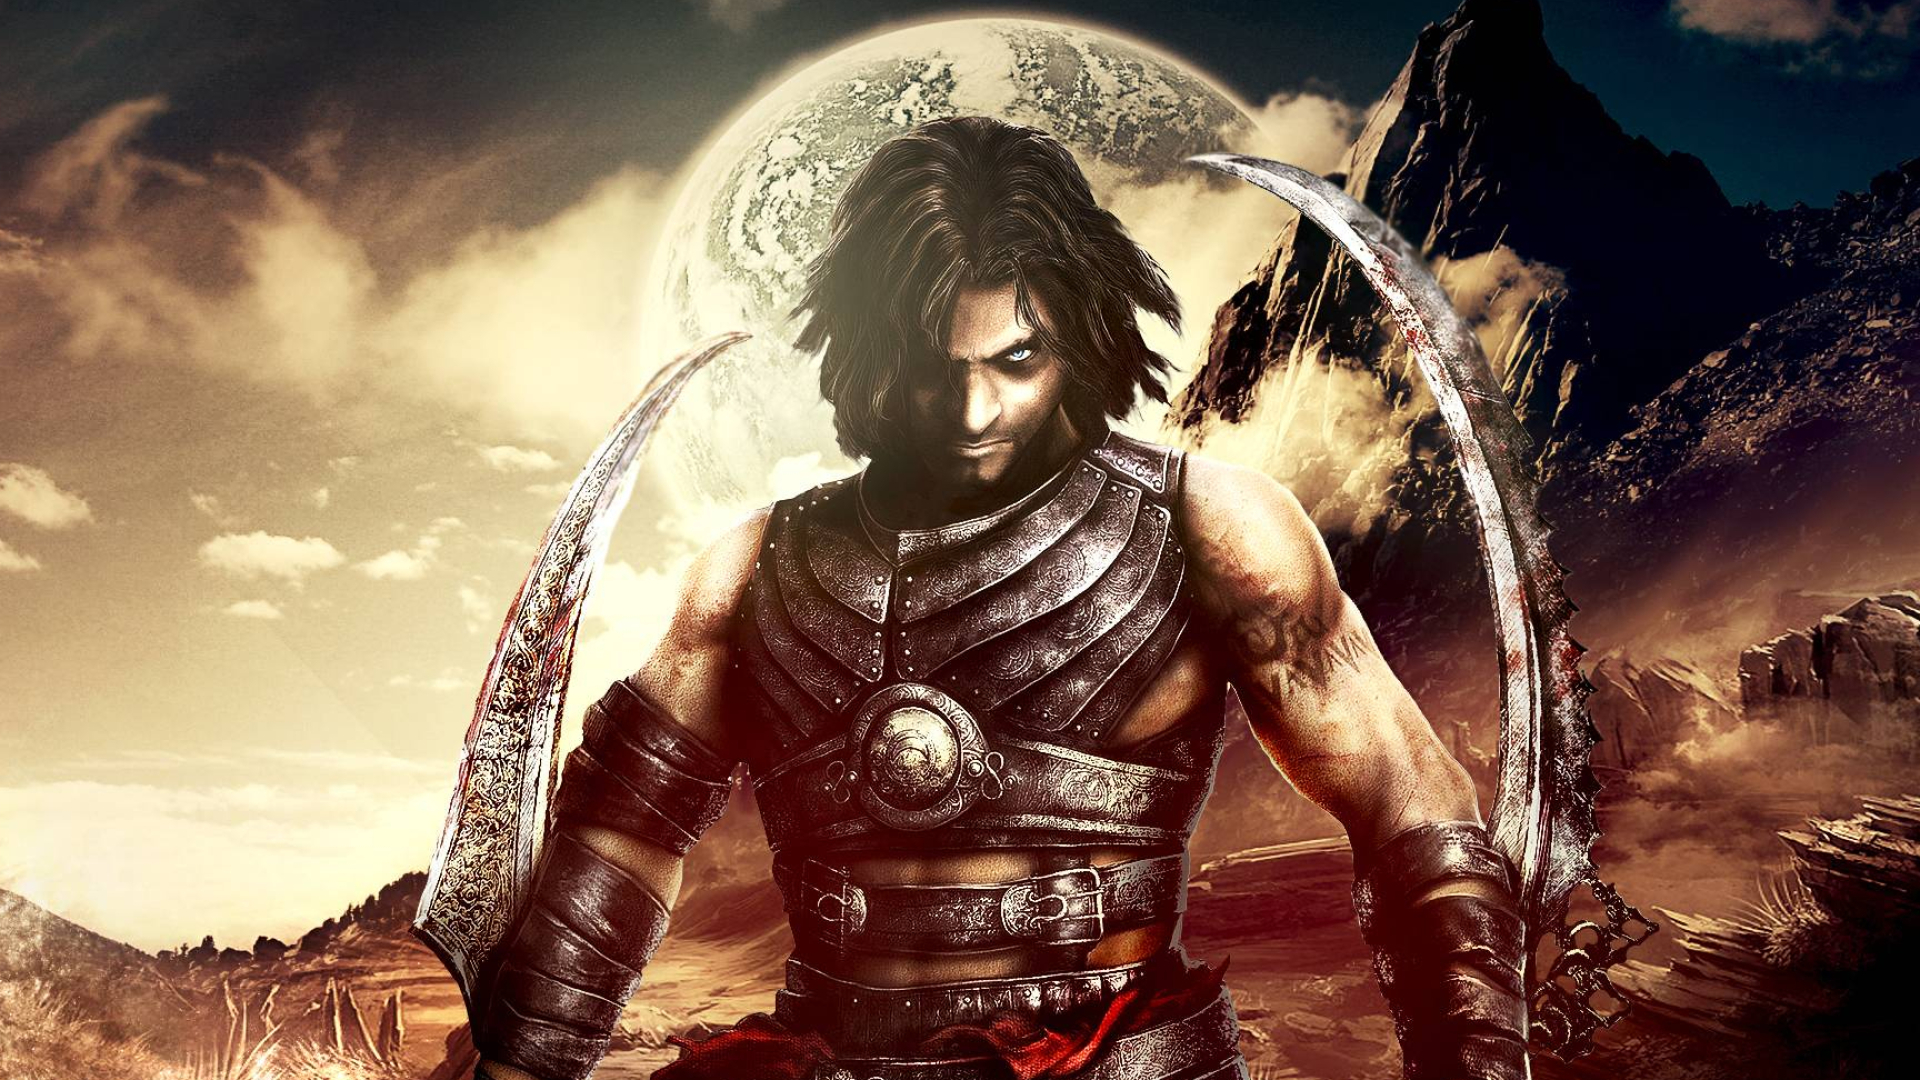 1920x1080 Wallpapers HD For Desktop Prince Of Persia Warrior Withi